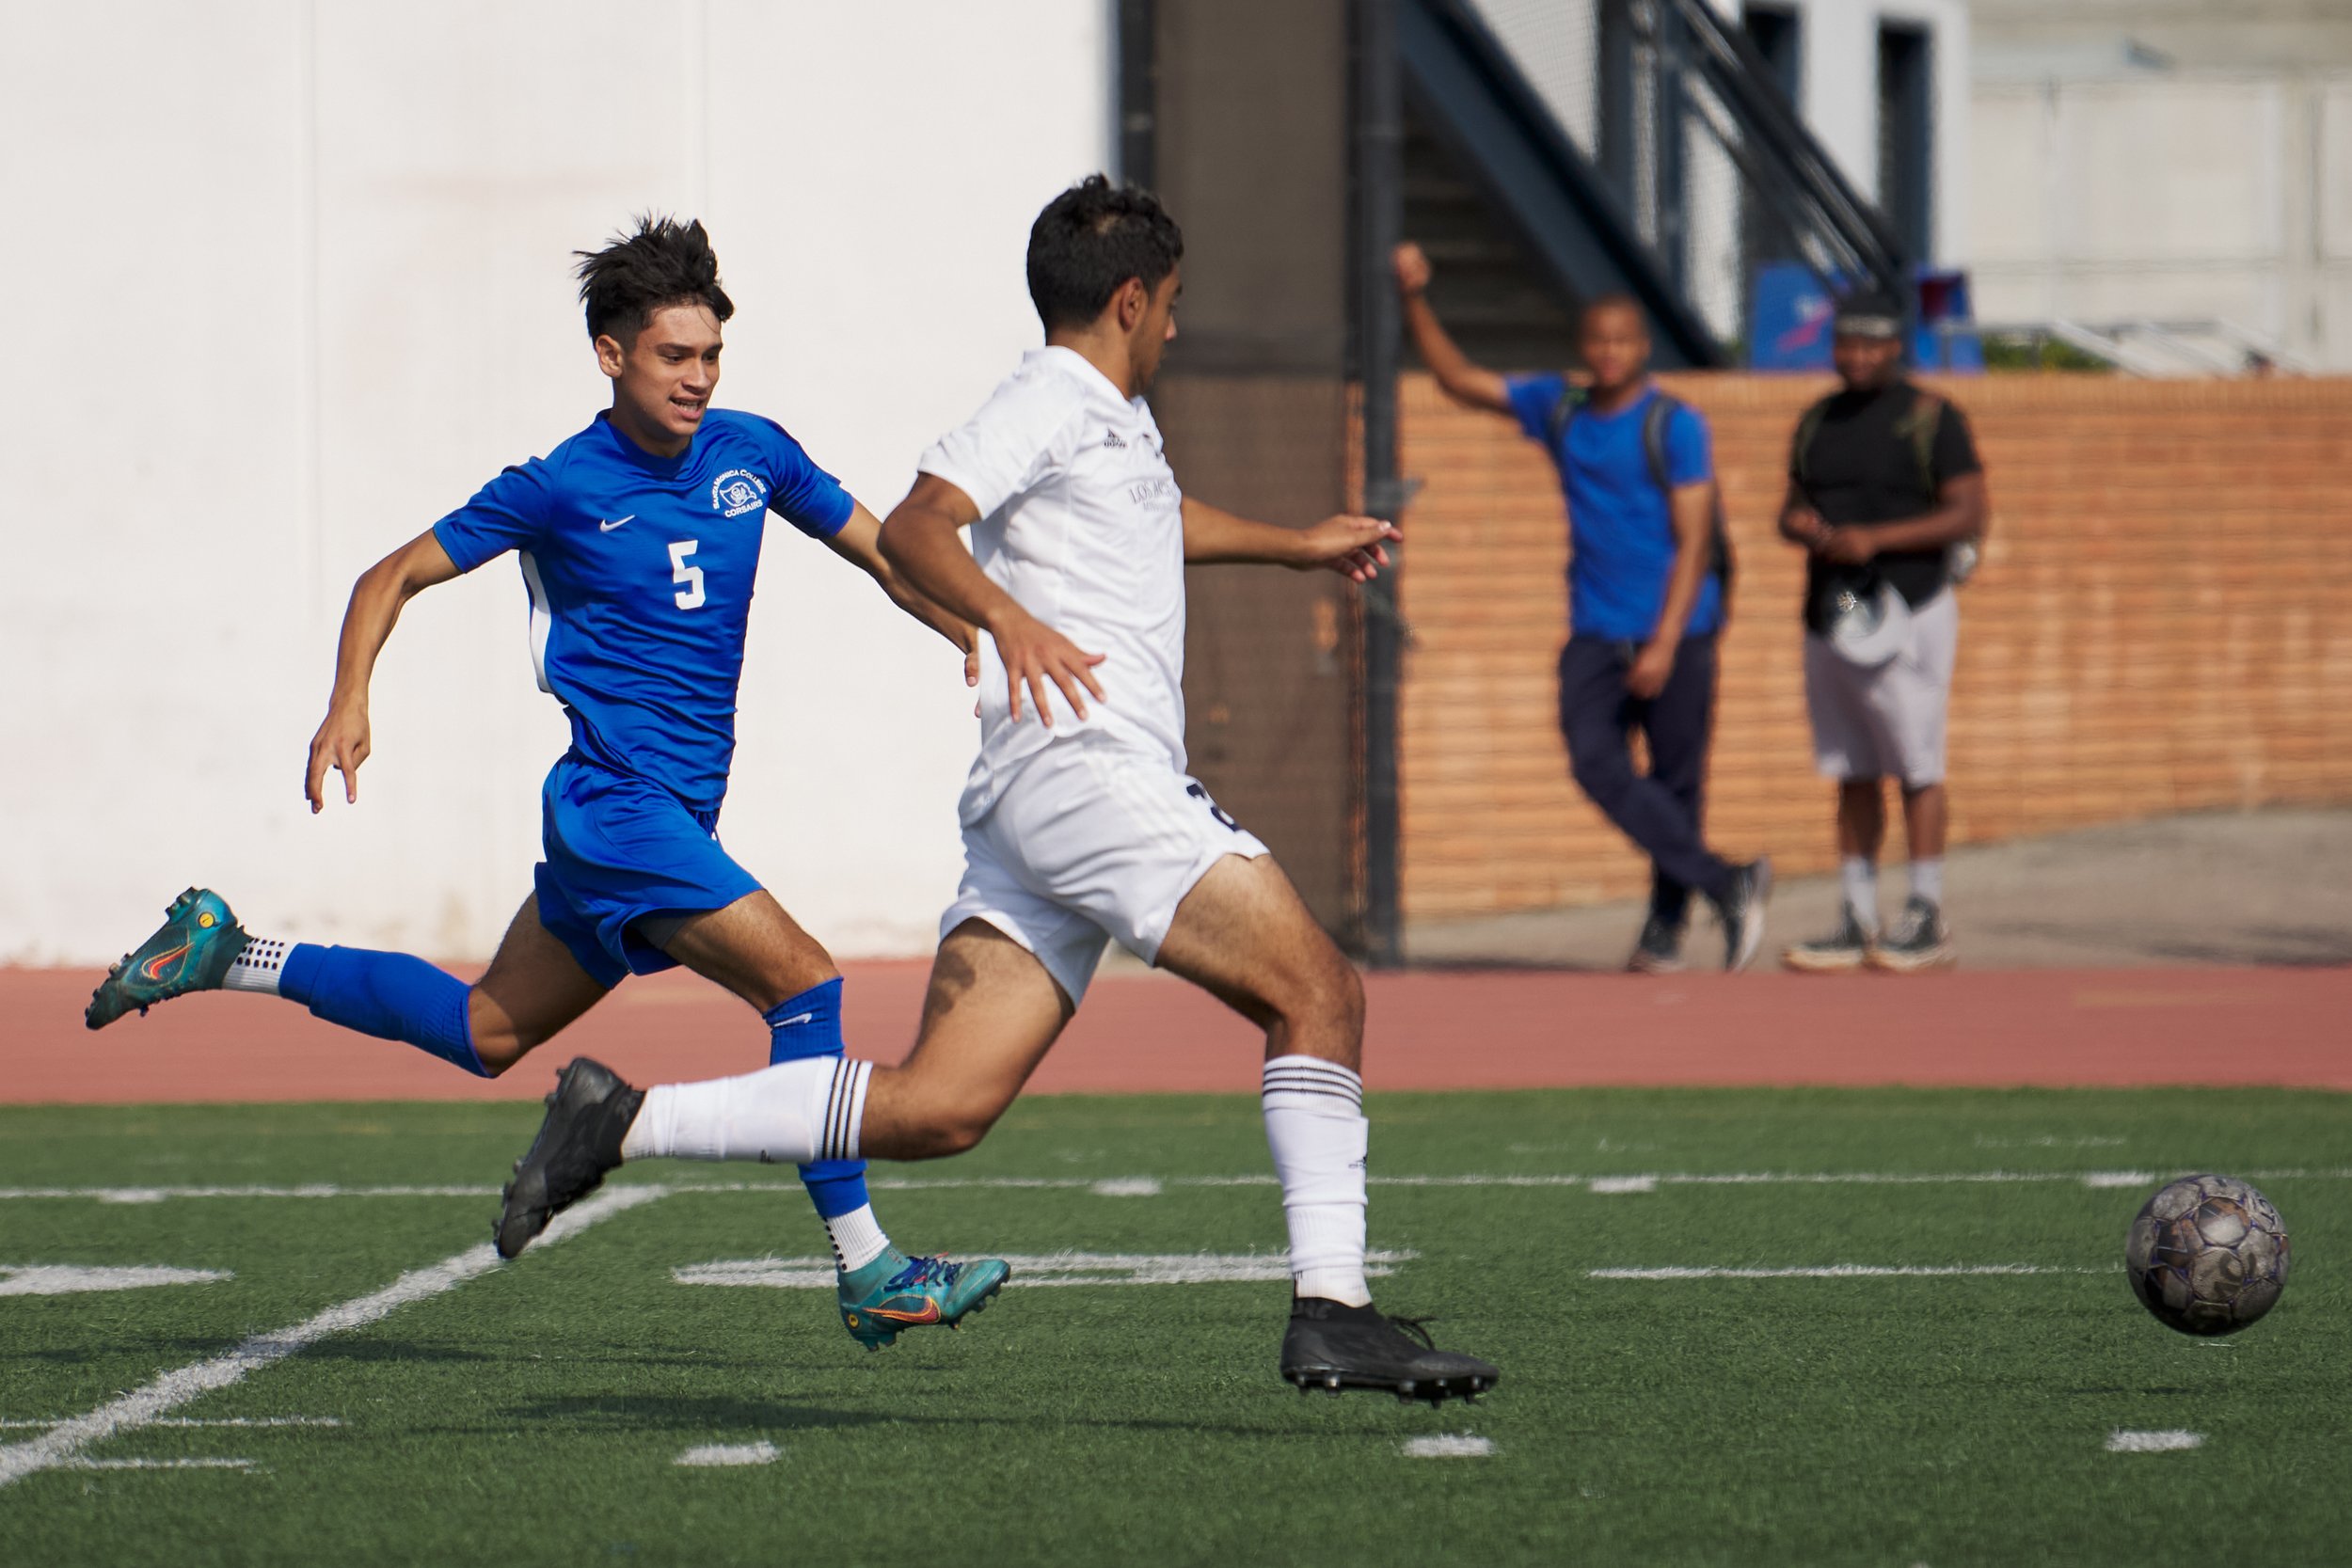  Santa Monica College Corsairs' Jose Urdiano and Los Angeles Mission College Eagles' Nathan Soto during the men's soccer match on Tuesday, Nov. 1, 2022, at Corsair Field in Santa Monica, Calif. The Corsairs won 3-0. (Nicholas McCall | The Corsair) 